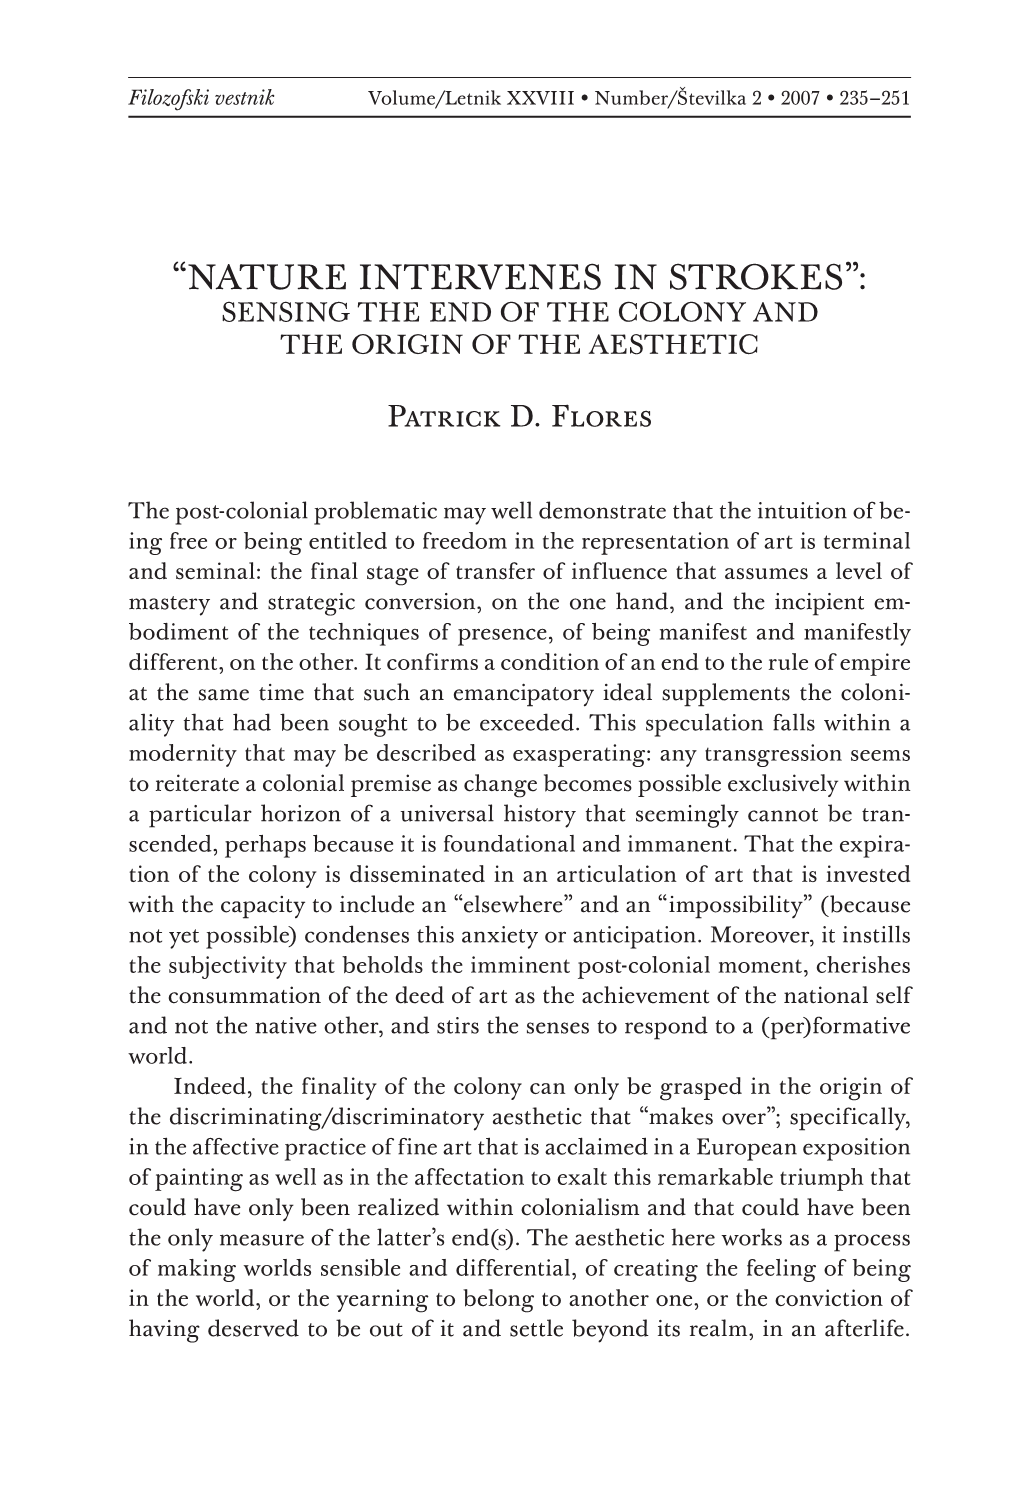 “Nature Intervenes in Strokes”: Sensing the End of the Colony and the Origin of the Aesthetic